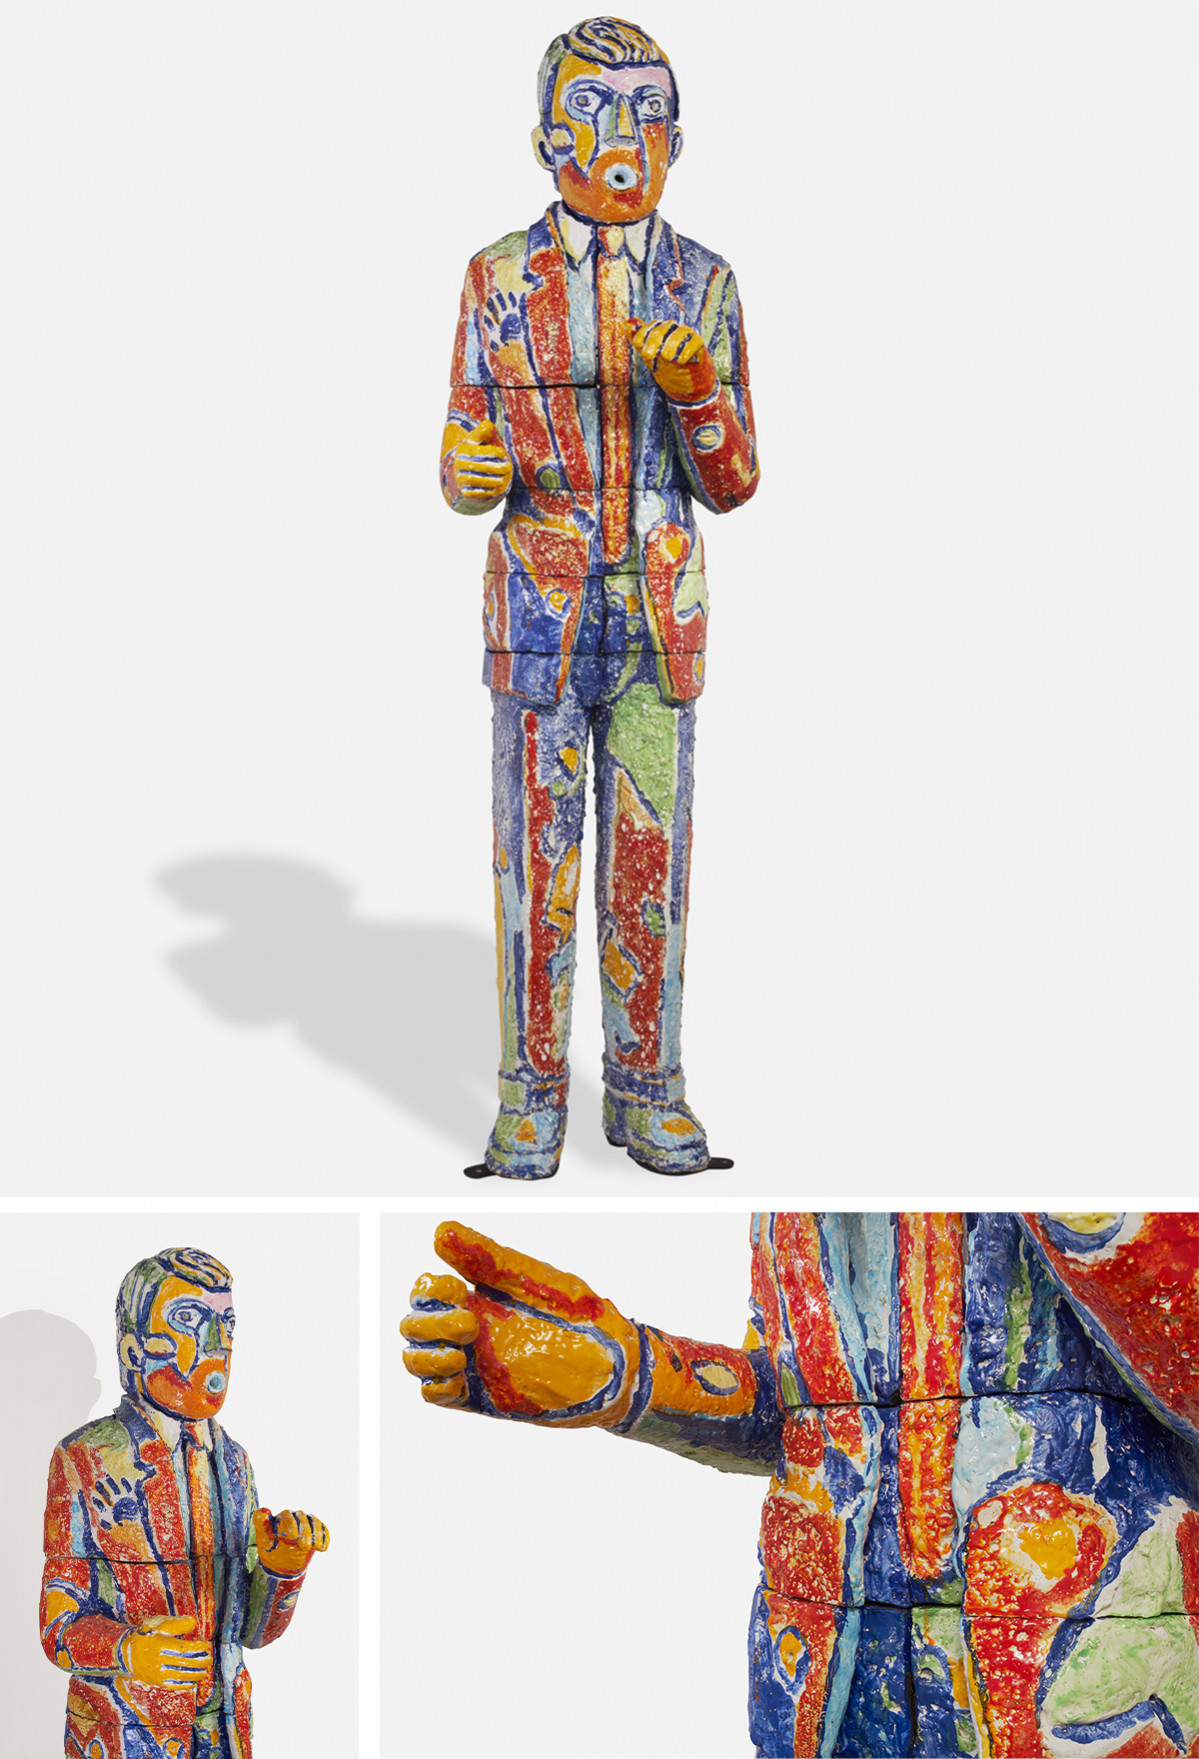 Violia Frey's ceramic and glazed sculpture, Blow Man from 1988-89